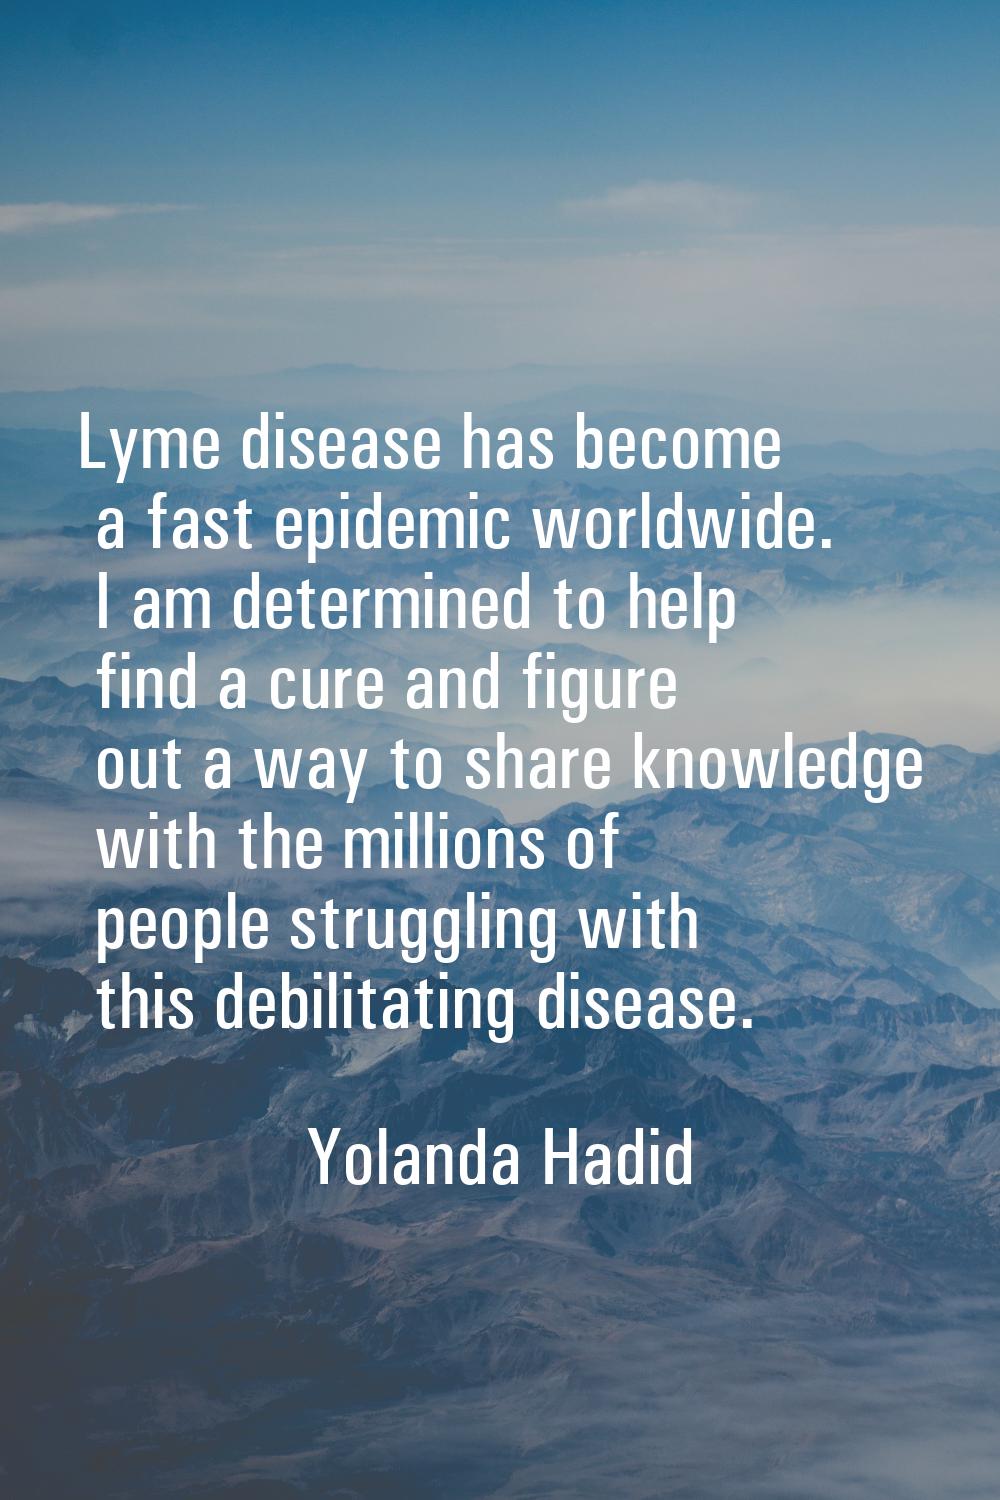 Lyme disease has become a fast epidemic worldwide. I am determined to help find a cure and figure o